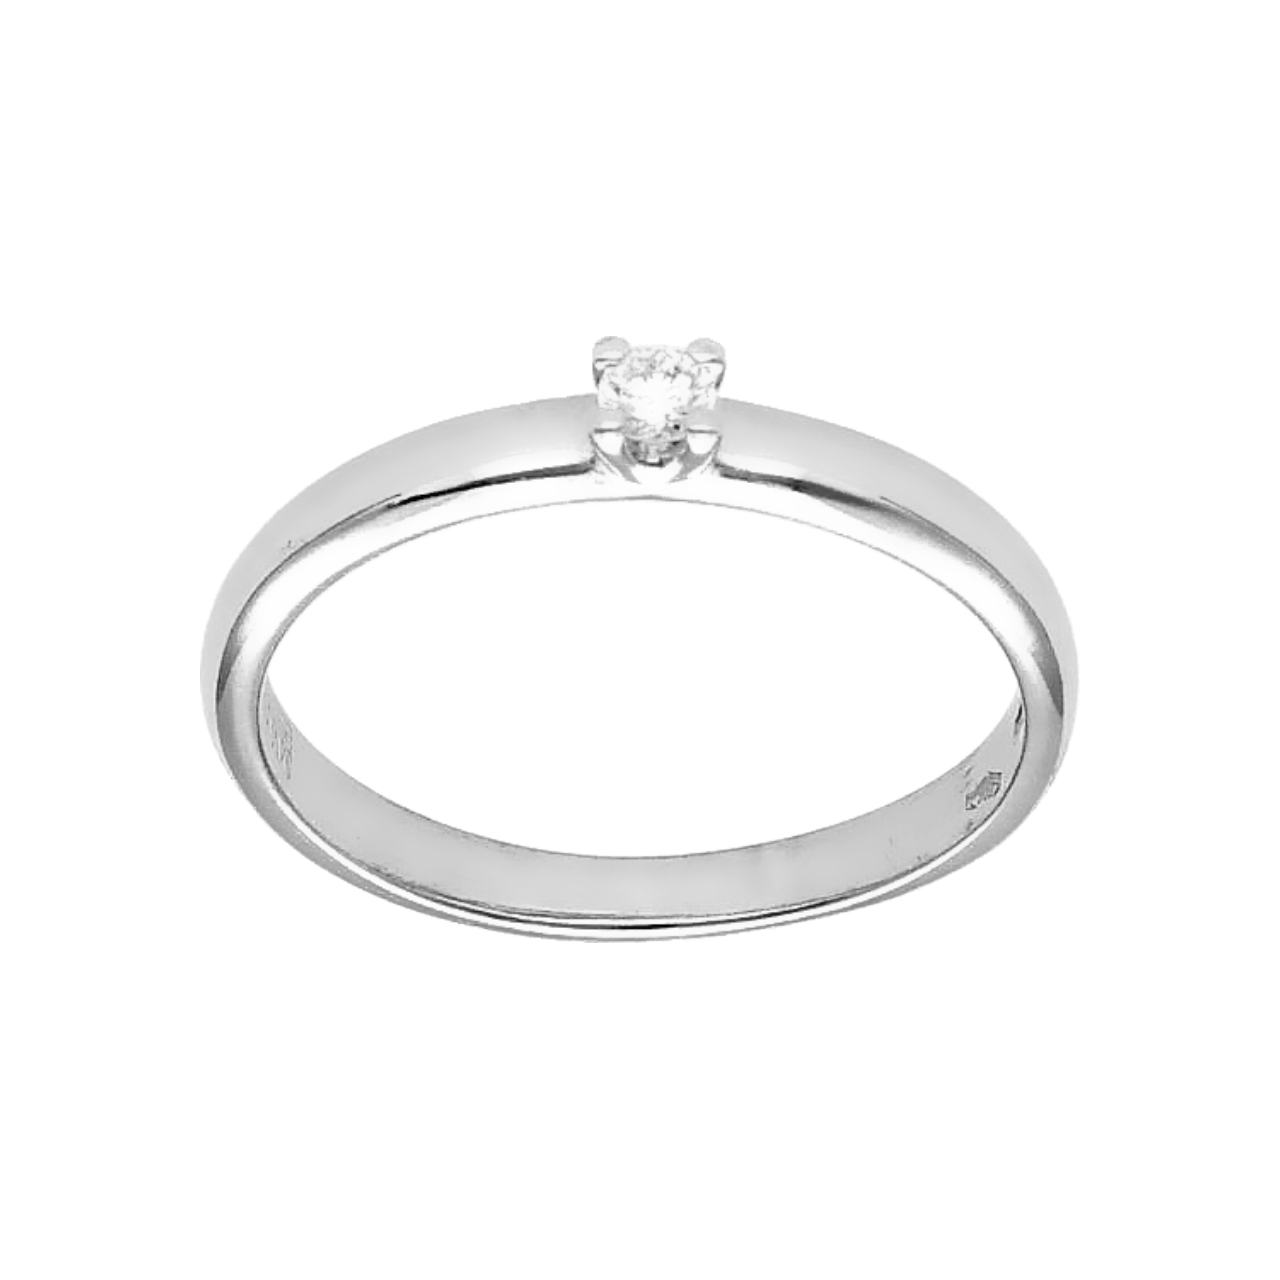 Solitary ring white gold with diamonds 0.05 ct.